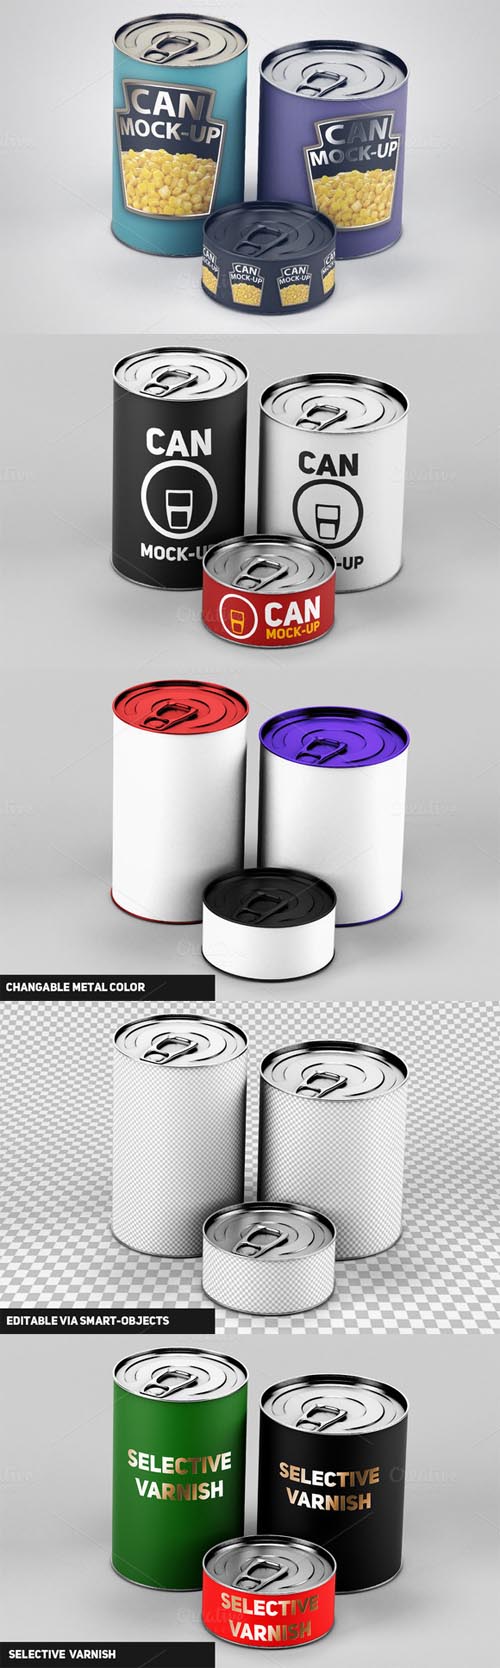 Cans Mock-Up id 514948